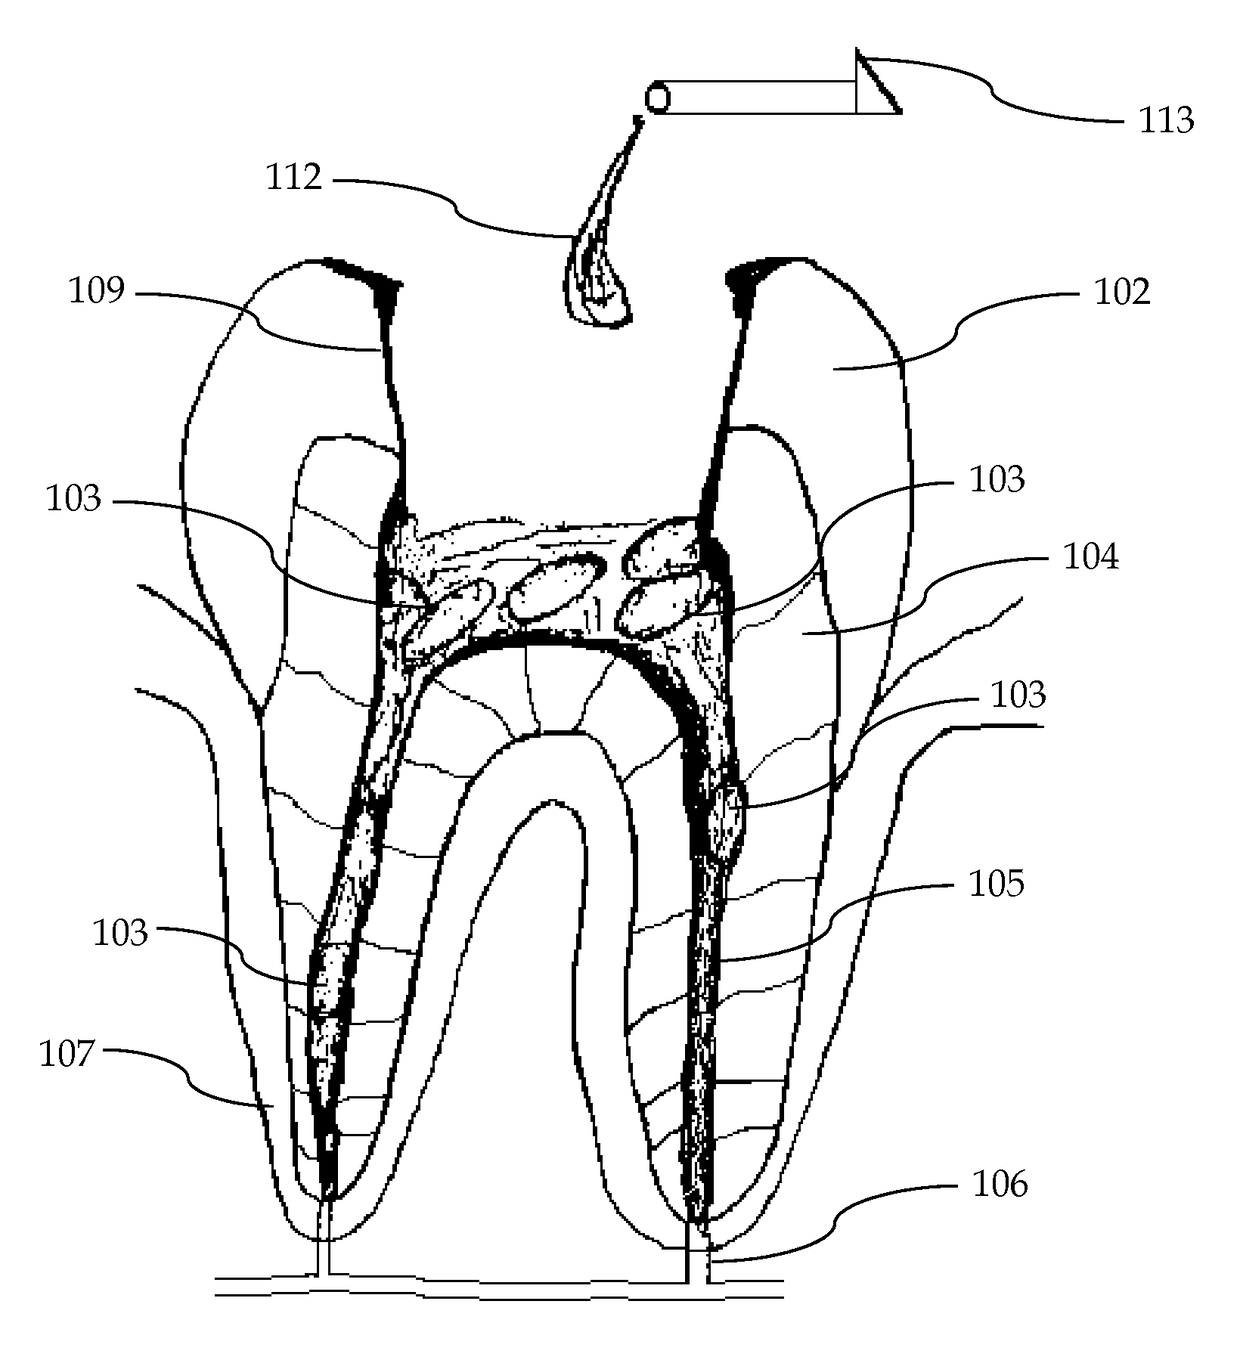 Composition and method of using medicament for endodontic irrigation, stem cell preparations and tissue regeneration